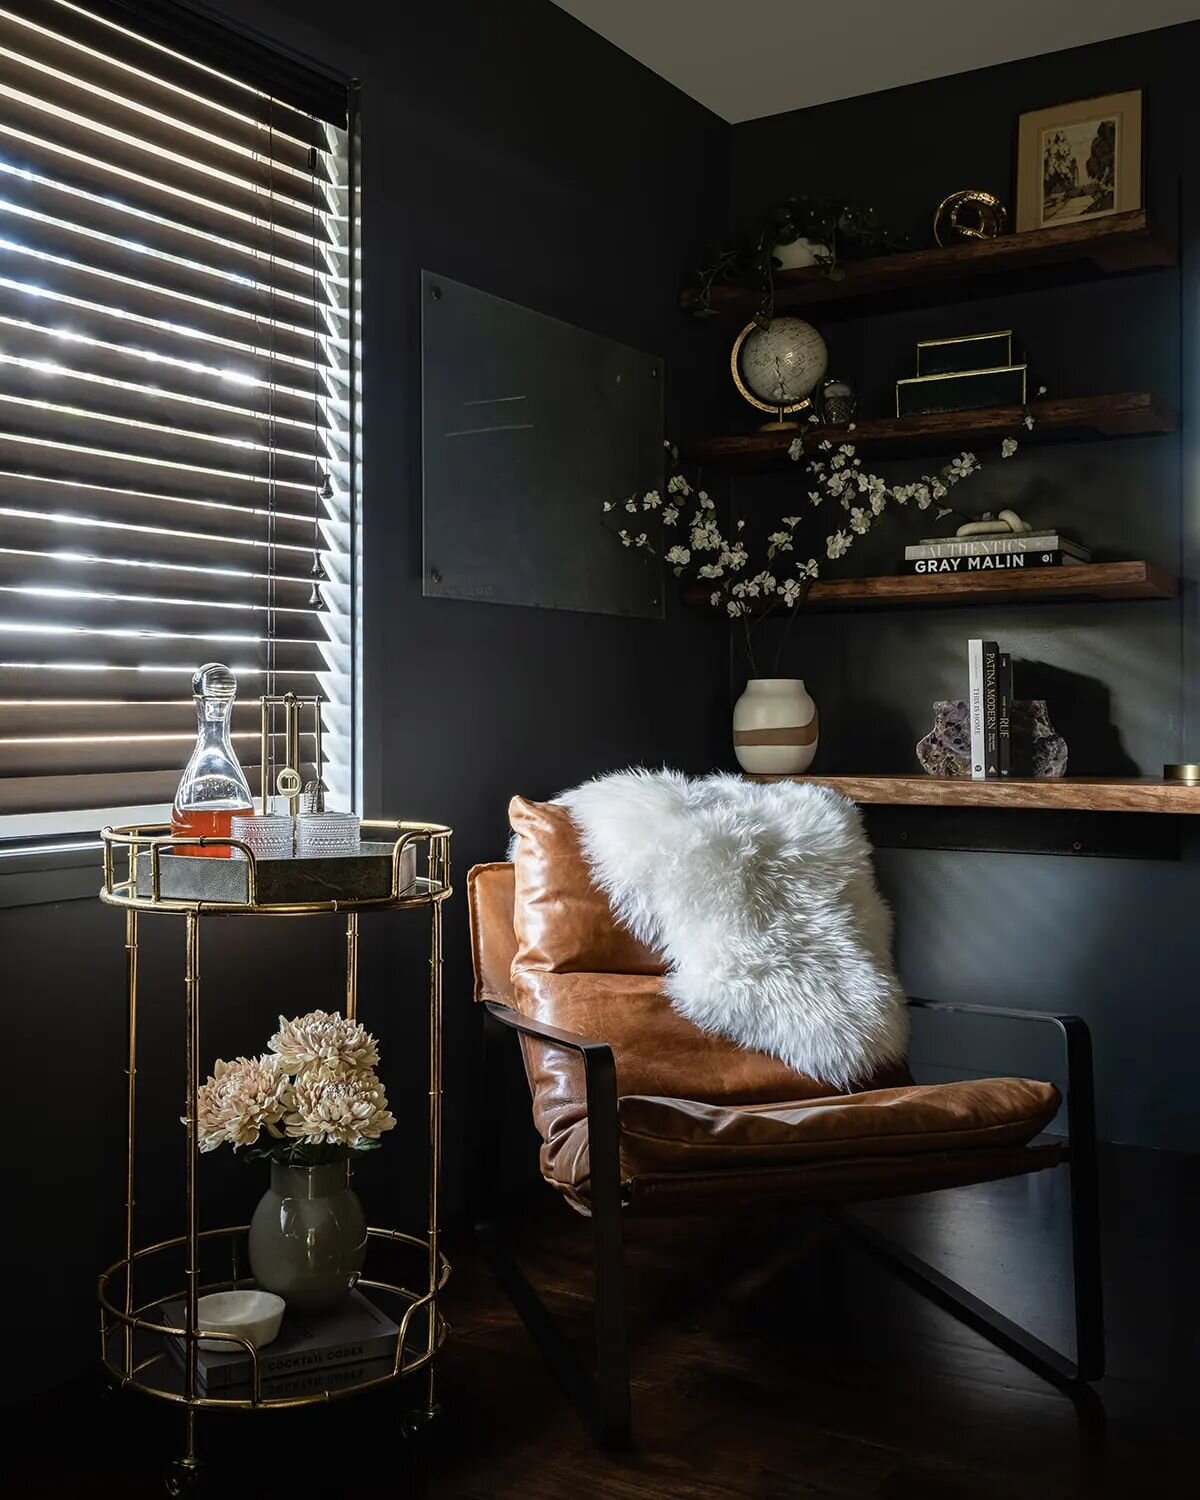 This moody, cozy corner of the Conservatory in #QBBlueRidge is one of my favorite corners ever. Featuring a wall-to-wall live edge desk and matching floating shelves, this space is as functional as it is beautiful. 📸 by @_karamercer 
.
.
.
.
.
#desi